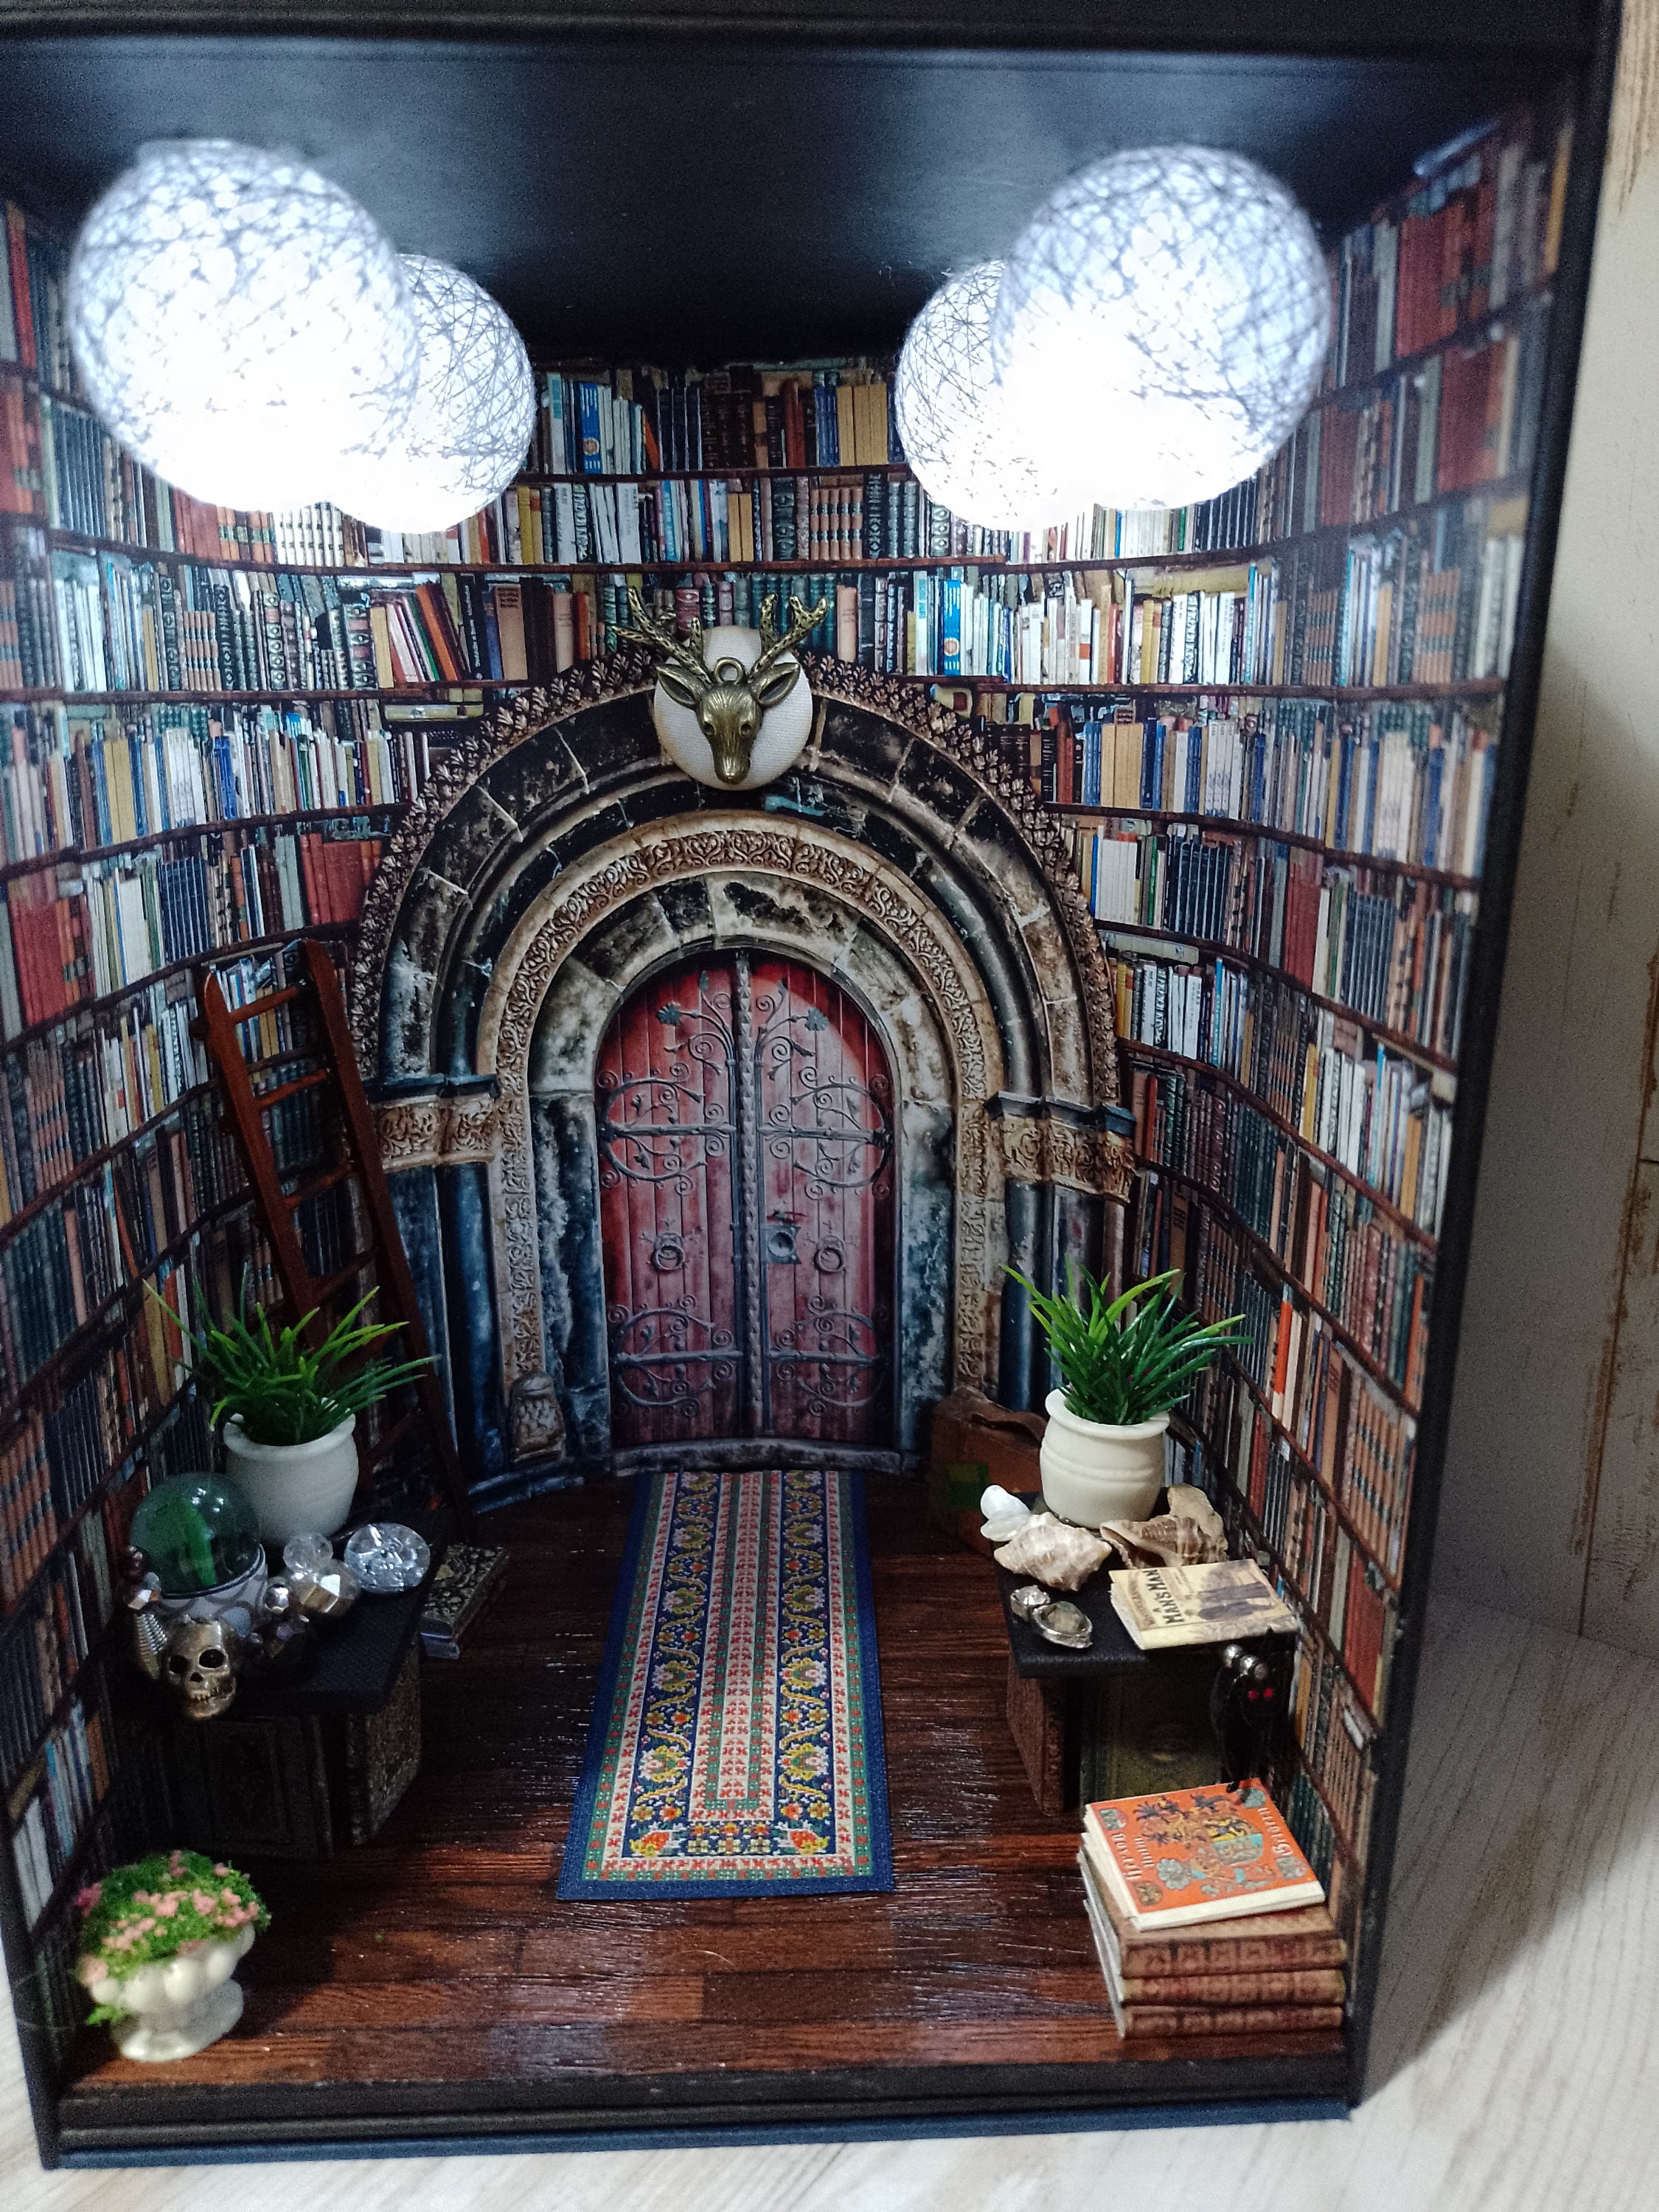 Booknook, Book Nook, Diorama, Miniature Room, Library Room, Heaps of Books,  Cosy Chair, Mirrors, Timer Lights, Ideal Gift. -  Denmark